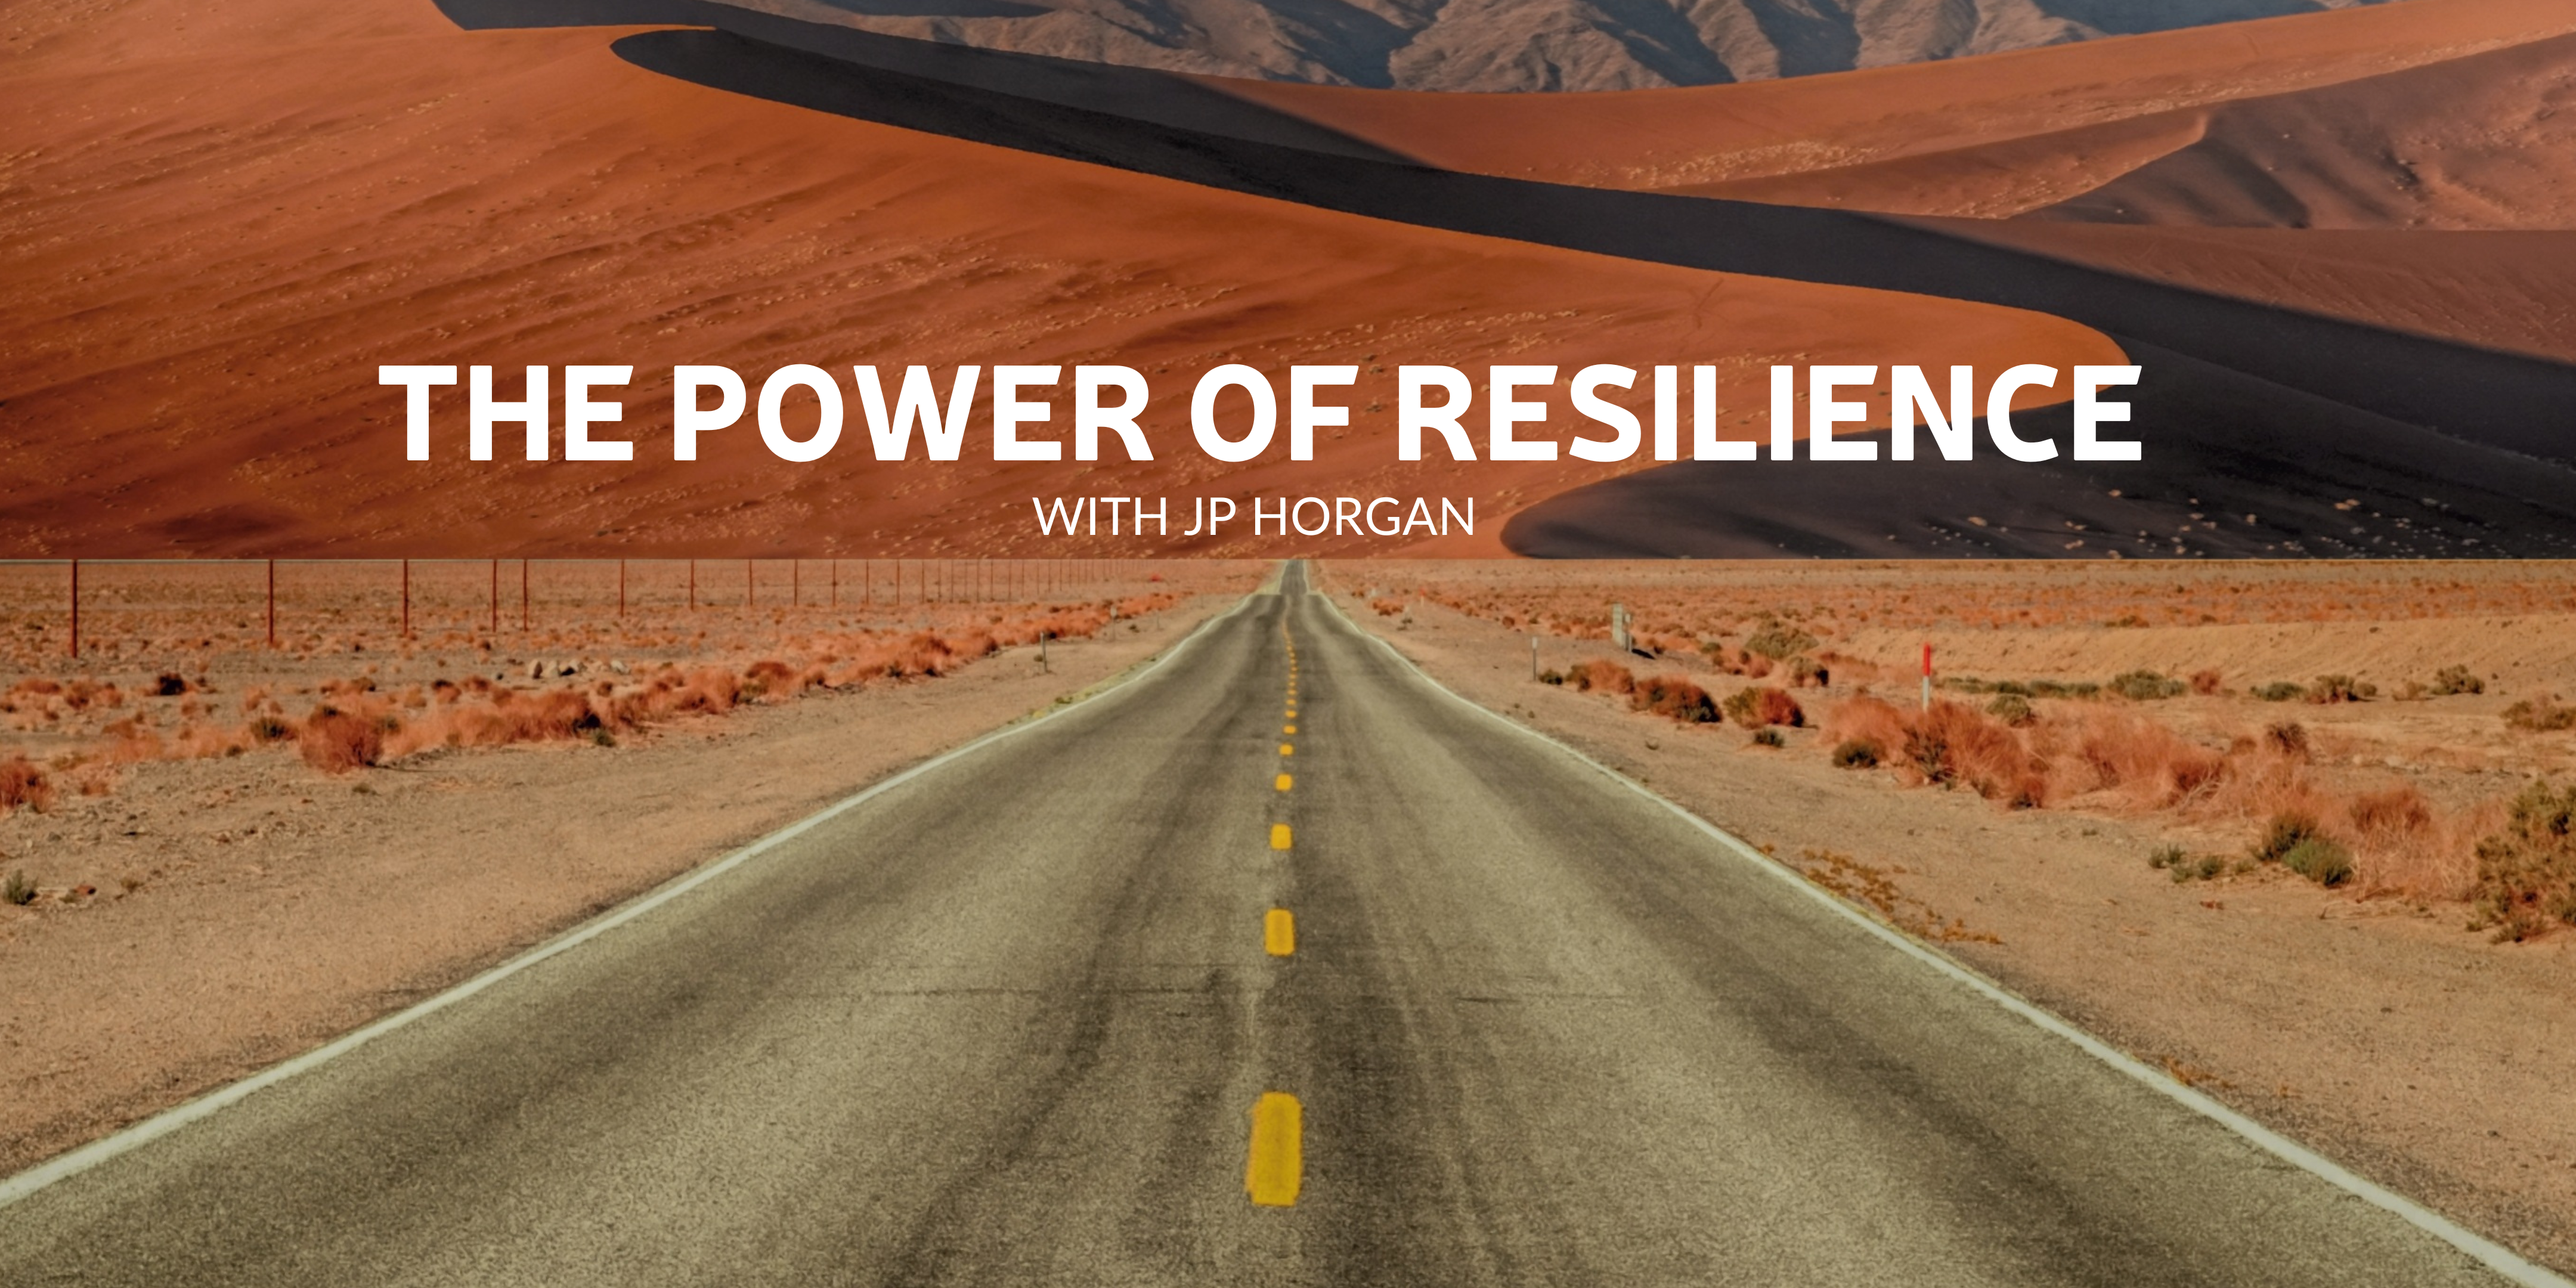 The Power of Resilience with JP Horgan